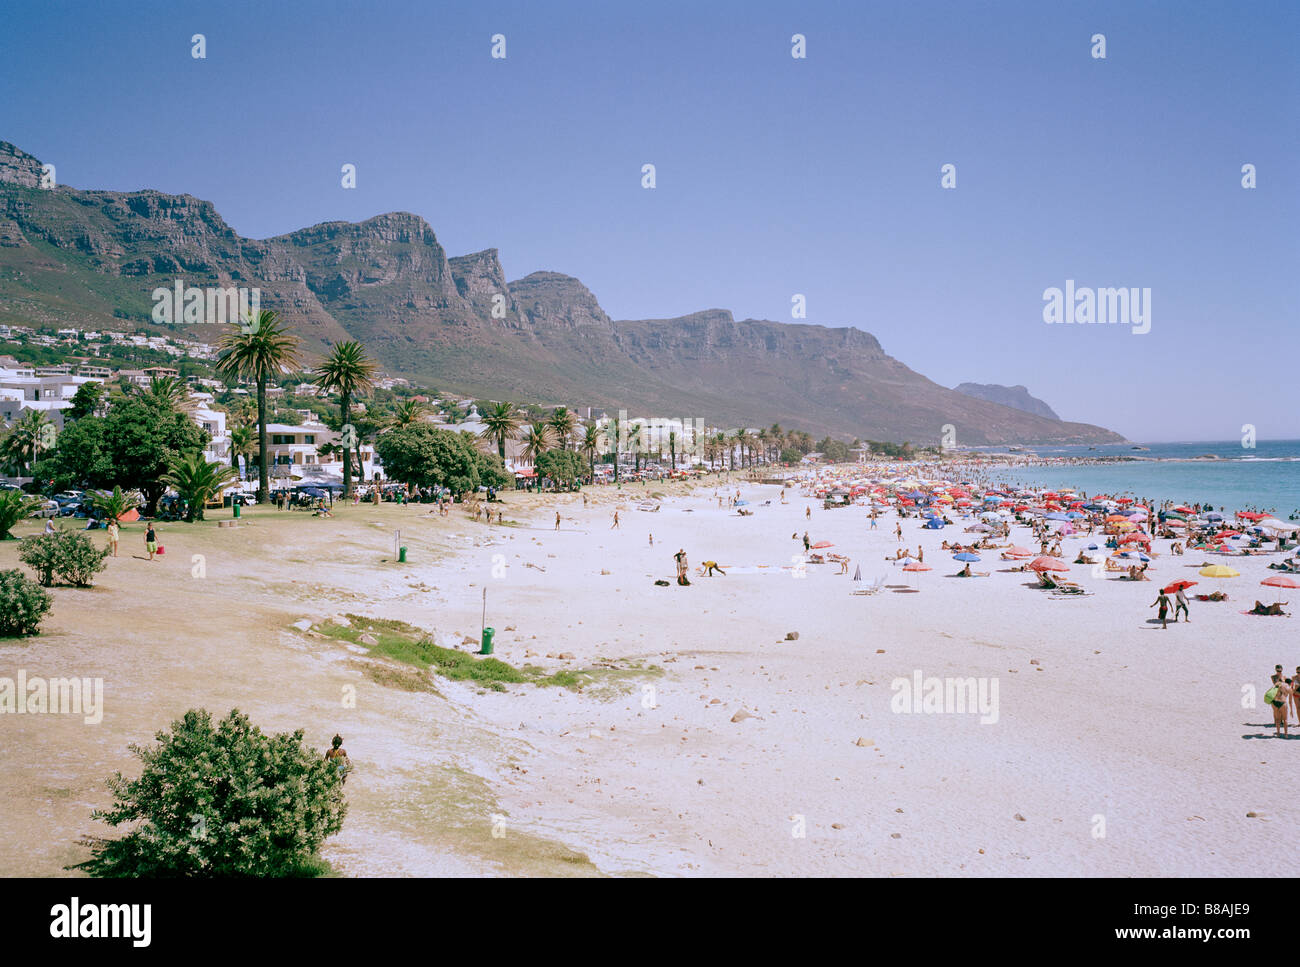 Camps Bay beach and sea in Cape Town in South Africa in Sub Saharan Africa. Apartheid Capetown African Holiday Vacation Tourism Tourist Travel Stock Photo